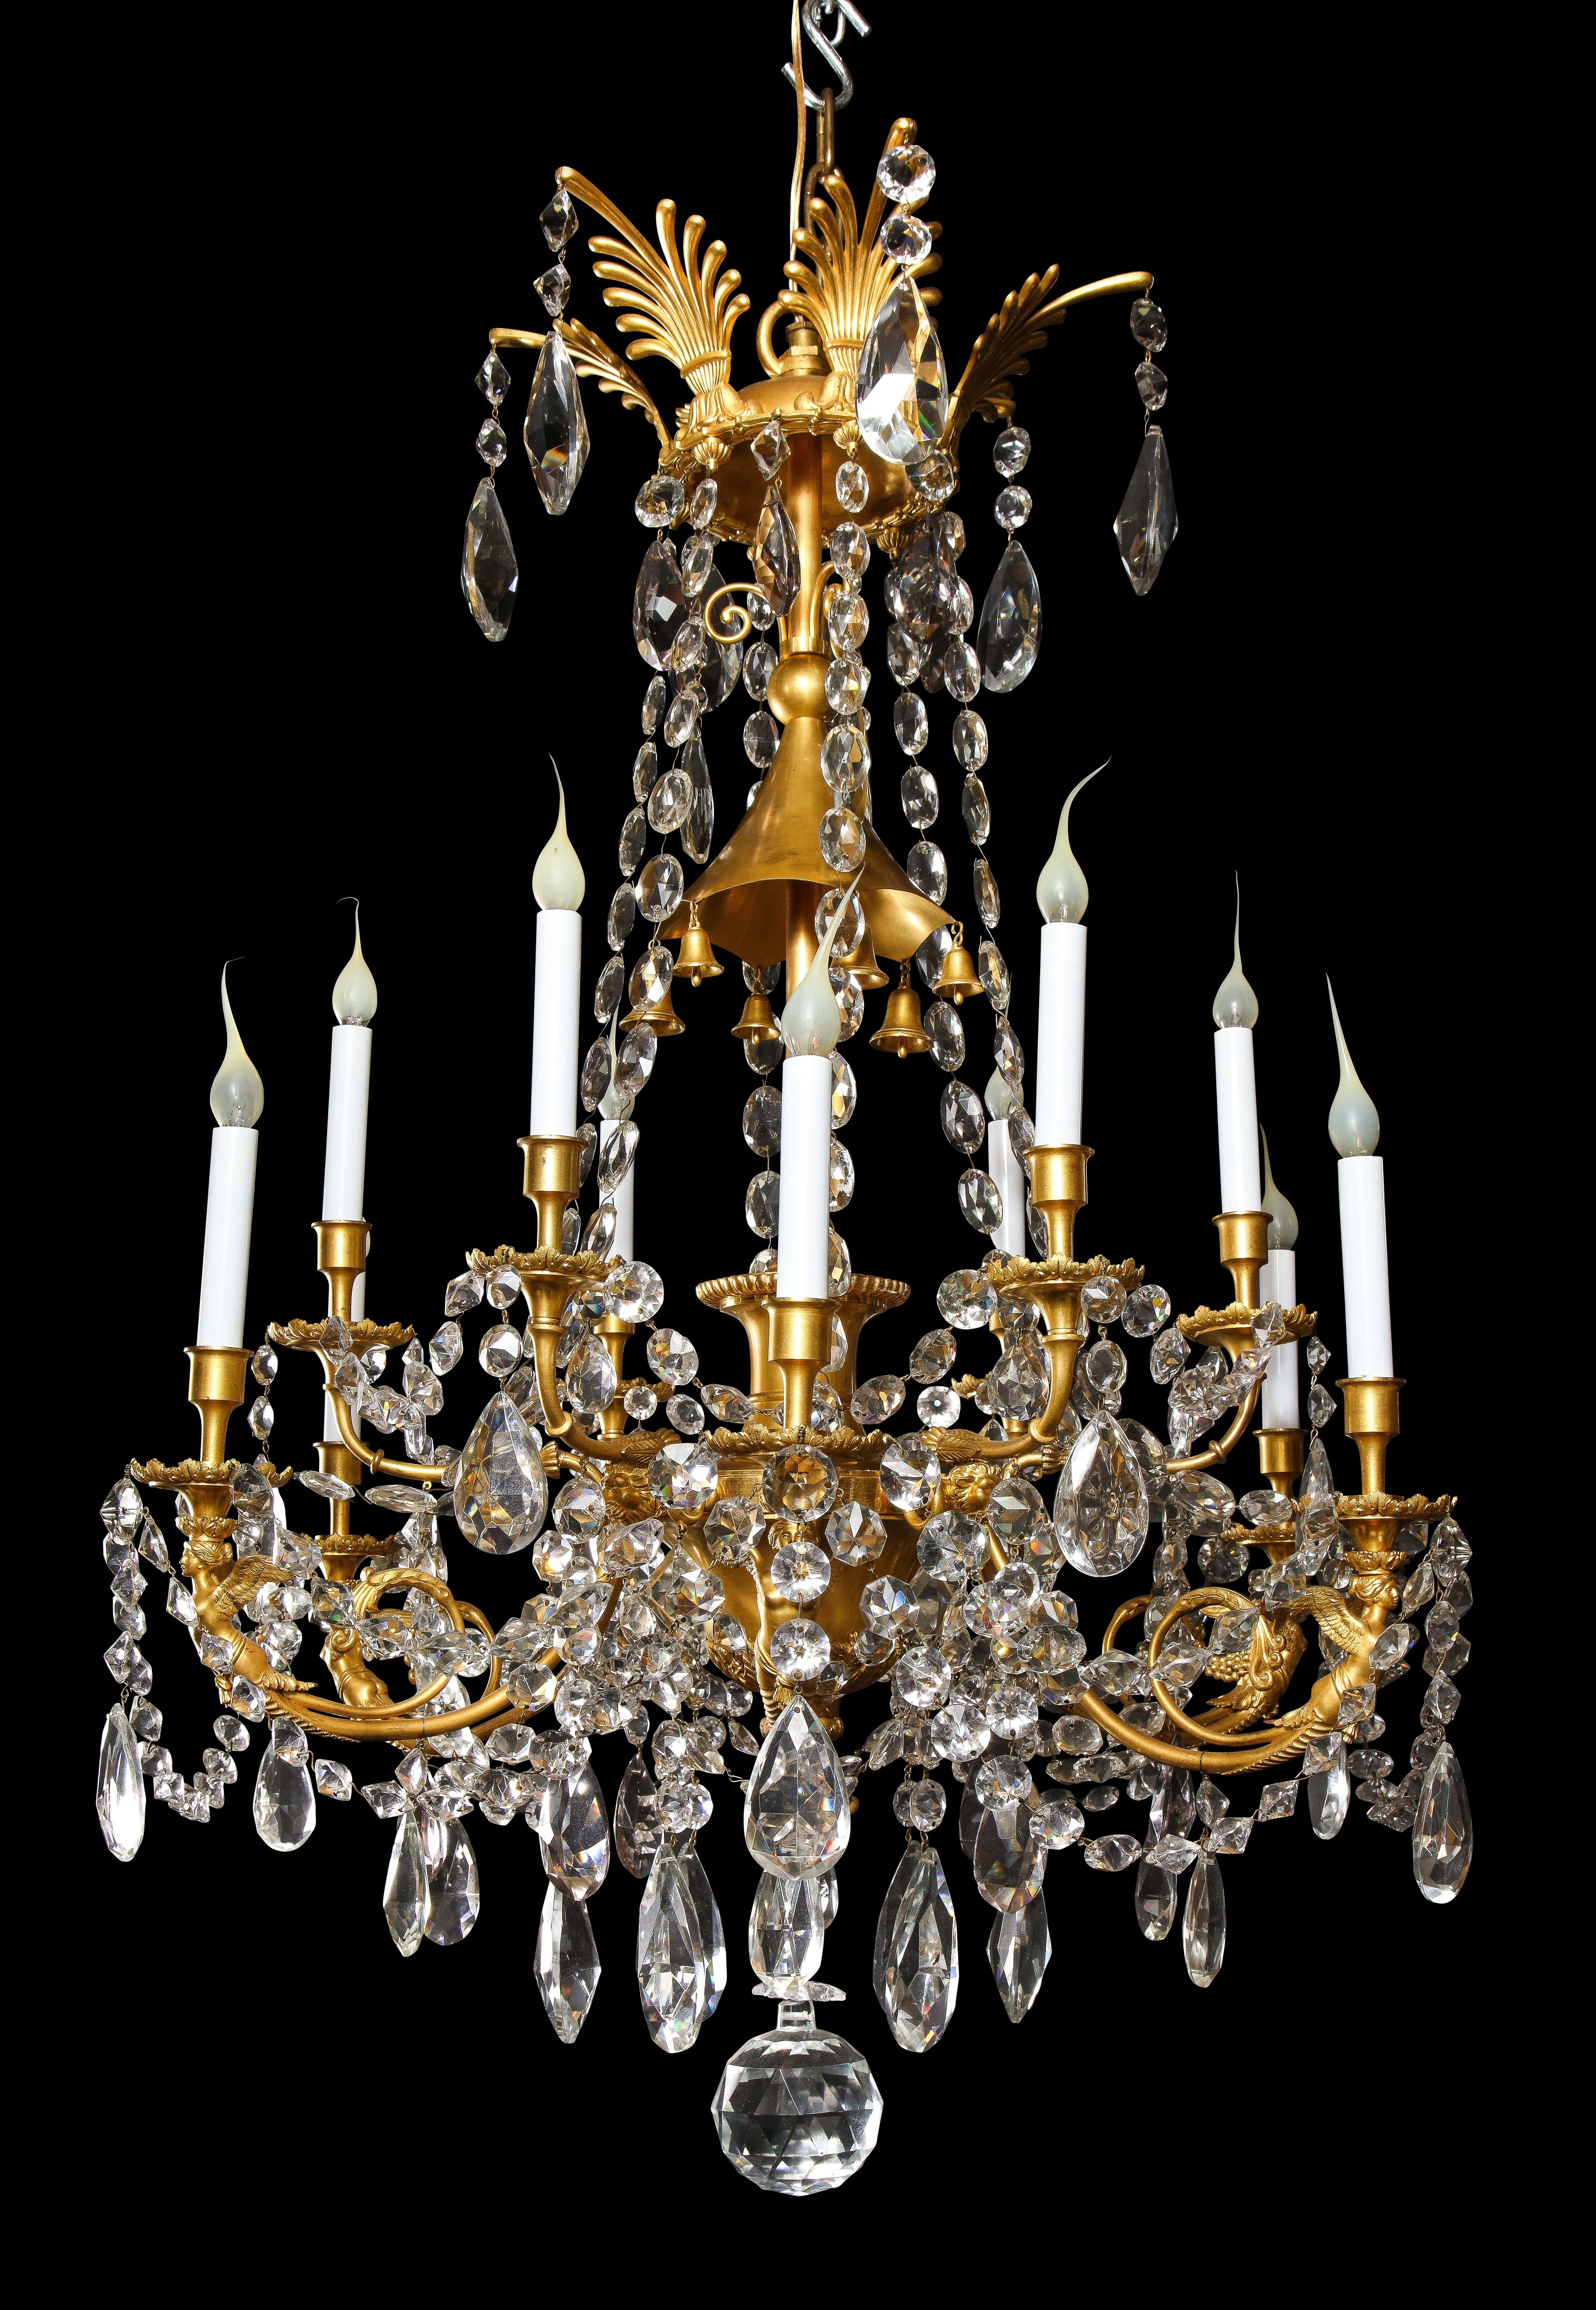 A Spectacular and Large Antique French Louis XVI style gilt bronze and cut crystal figural multi light double tier chandelier of exquisite craftsmanship. This unique chandelier is embellished with gilt bronze neoclassical figures and further adorned